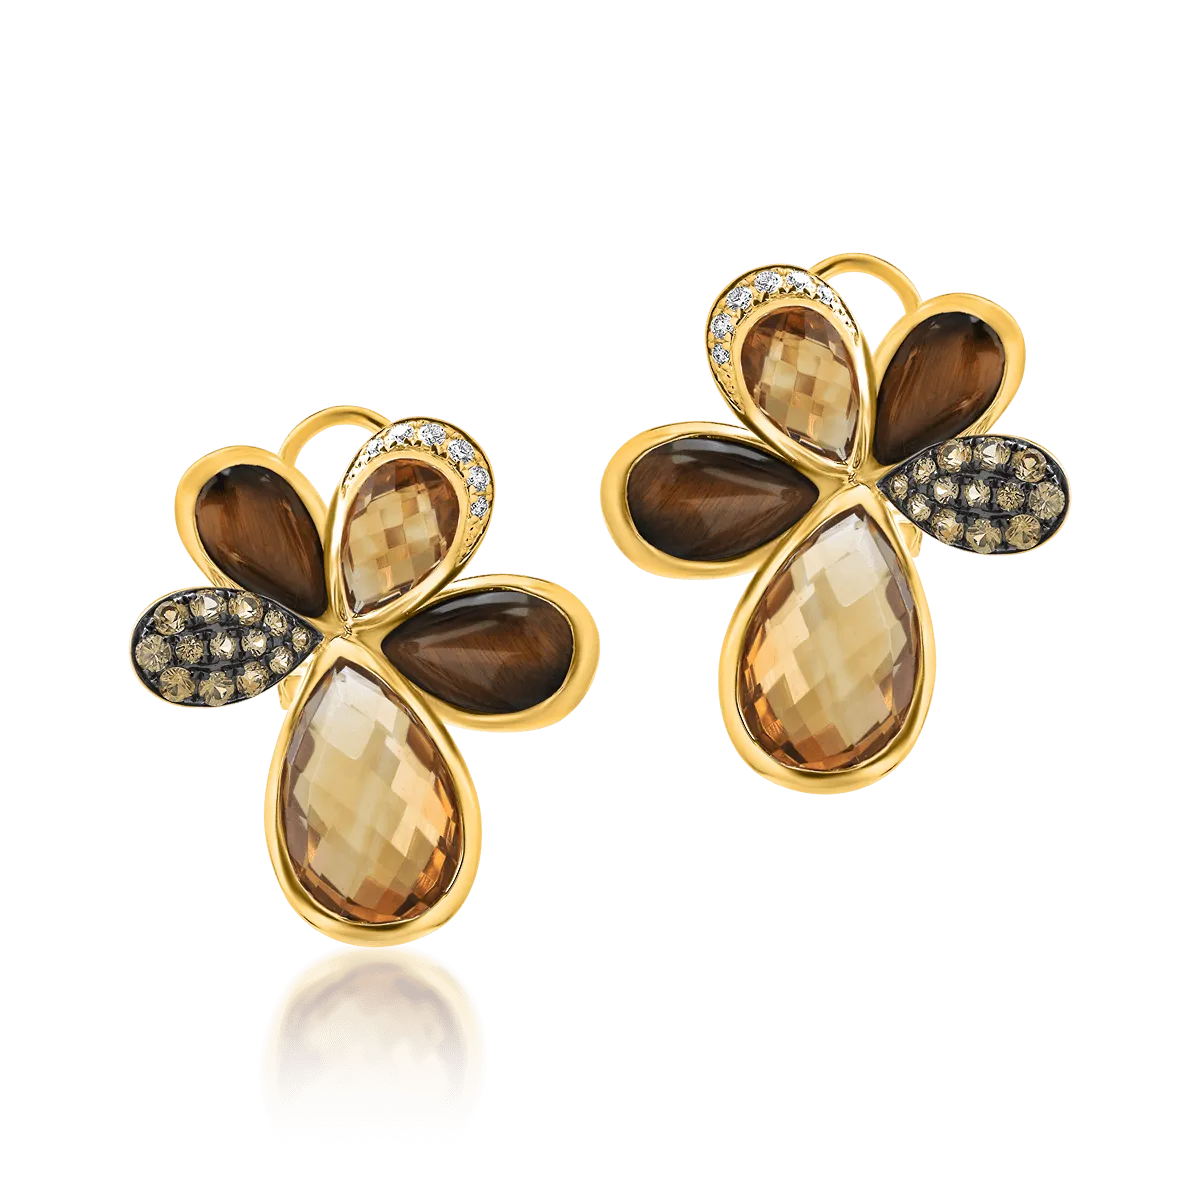 18K yellow gold earrings with 13.99ct precious and semiprecious stones